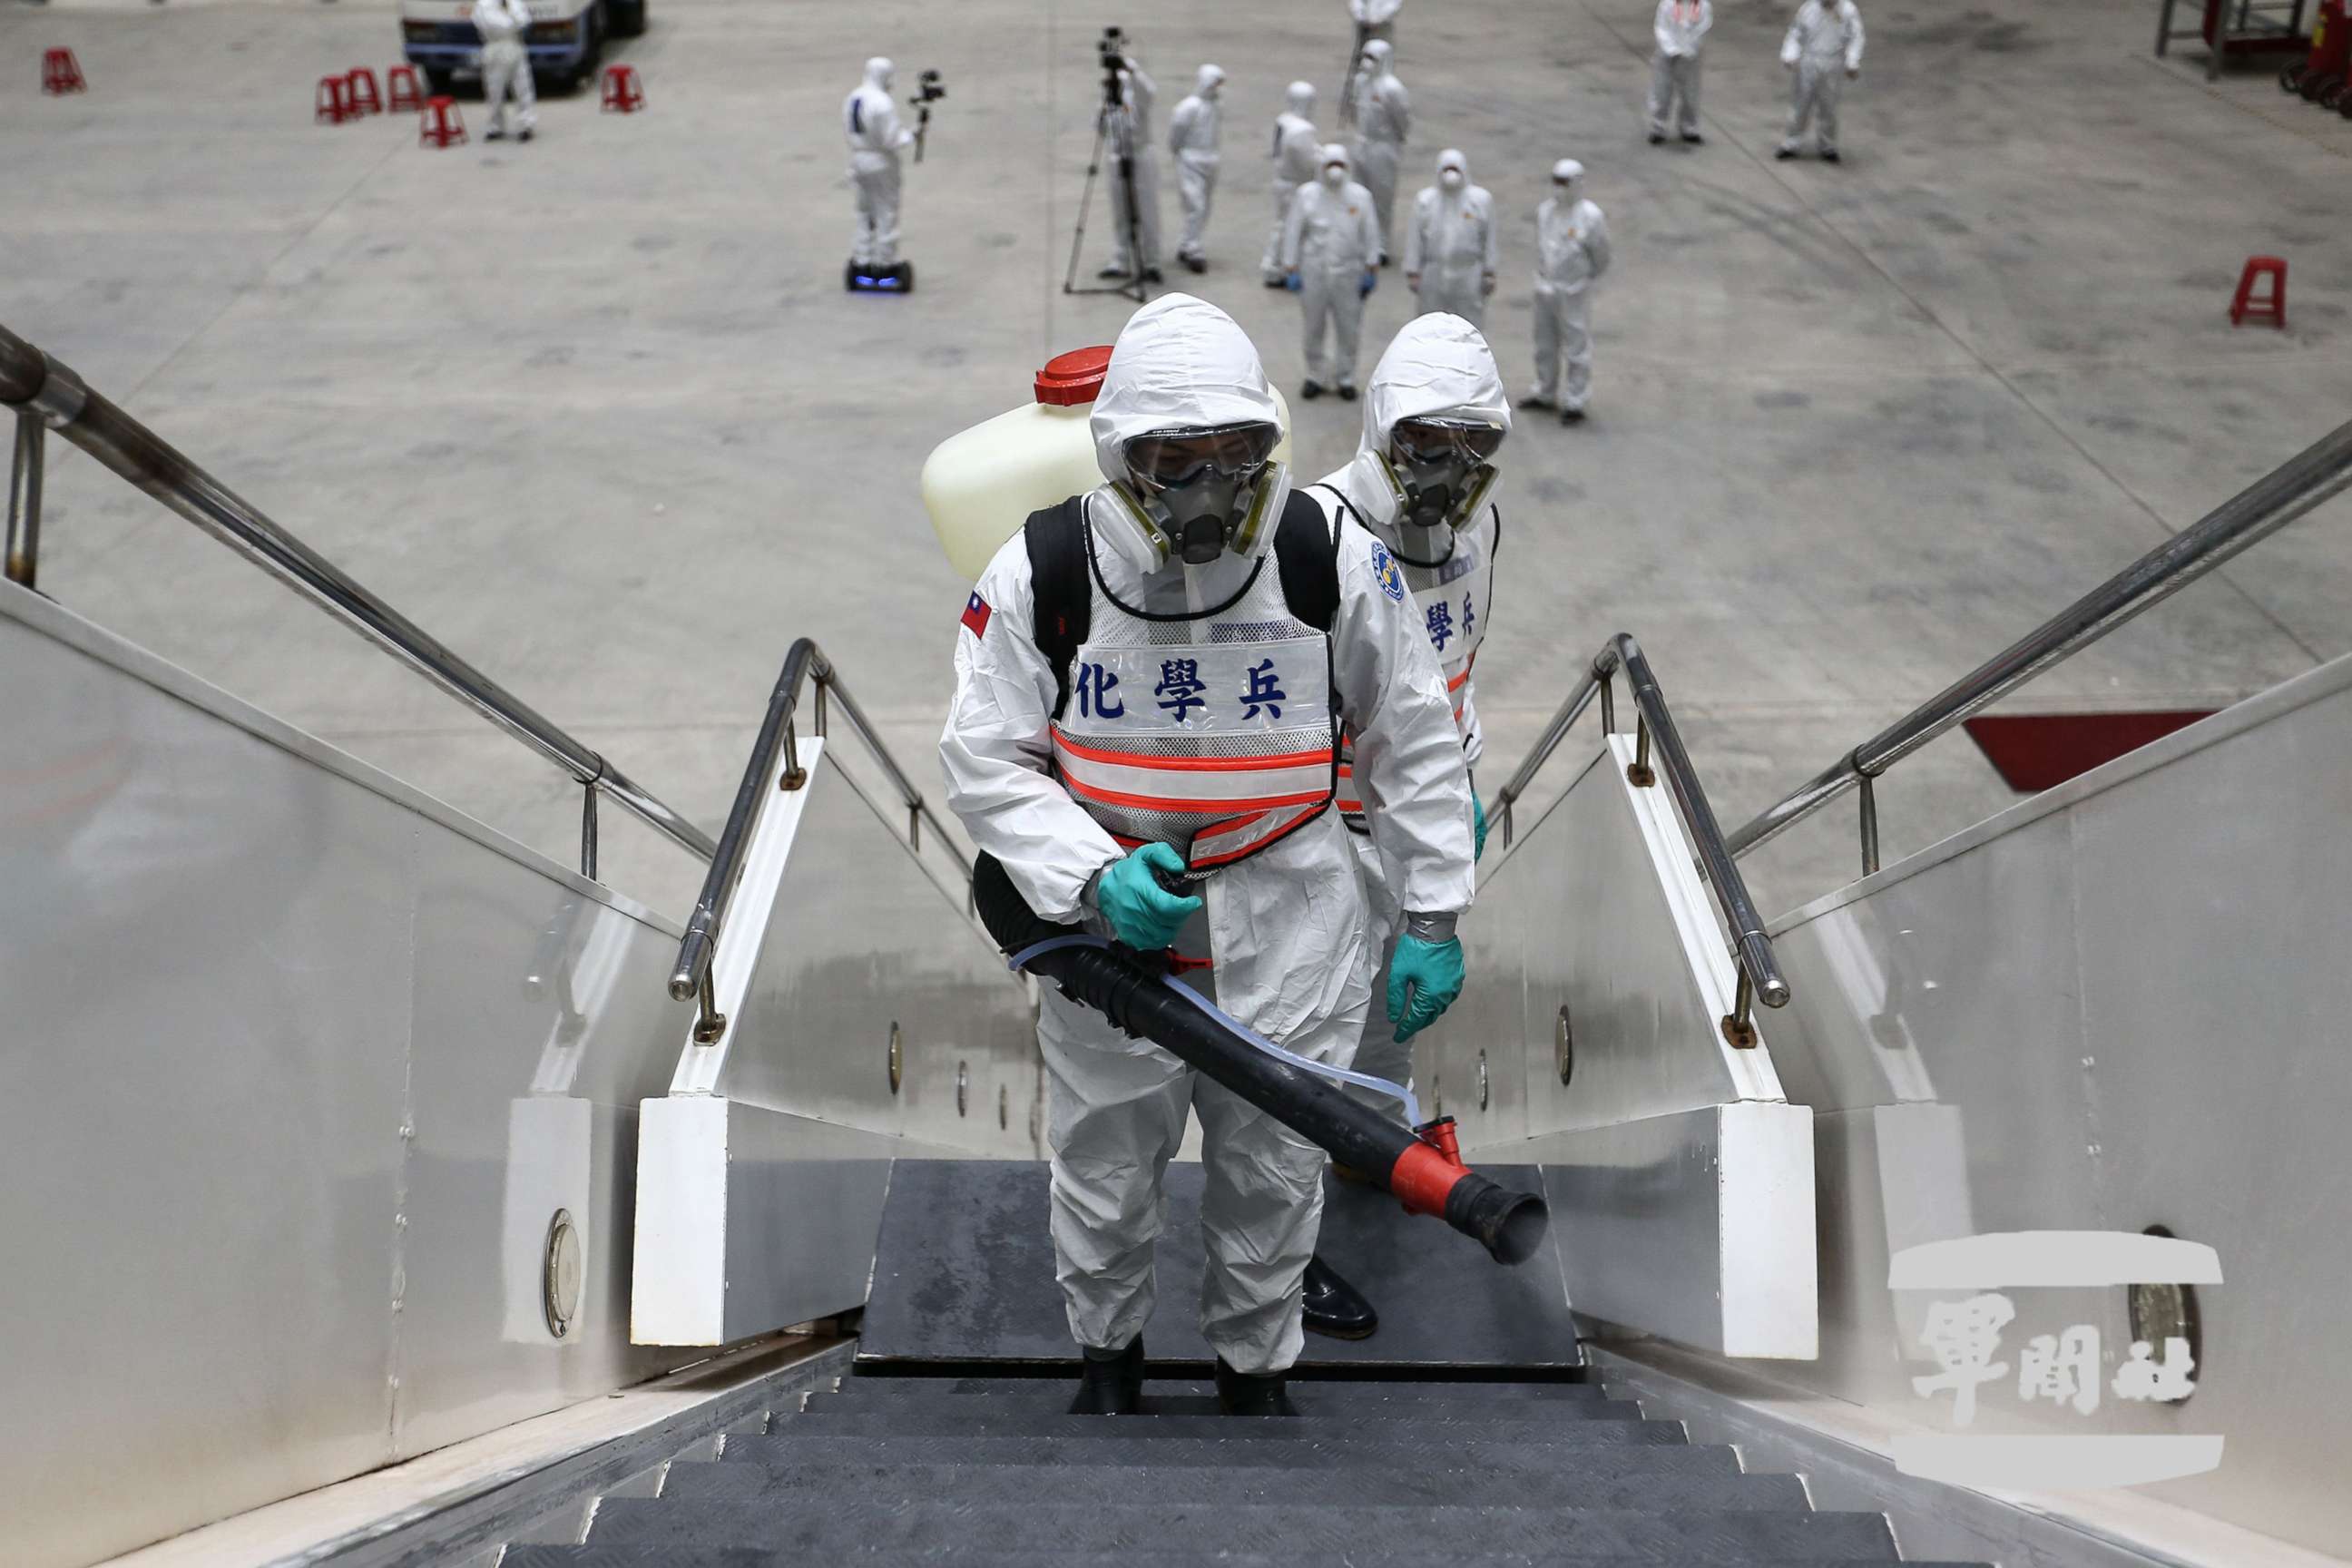 PHOTO: A photo made available by the Ministry of National Defense shows soldiers in protective suits disinfecting the boarding ladder after a China Eastern Airlines plane landed at Taoyuan International Airport in Taoyuan City, Taiwan, March 11, 2020. 